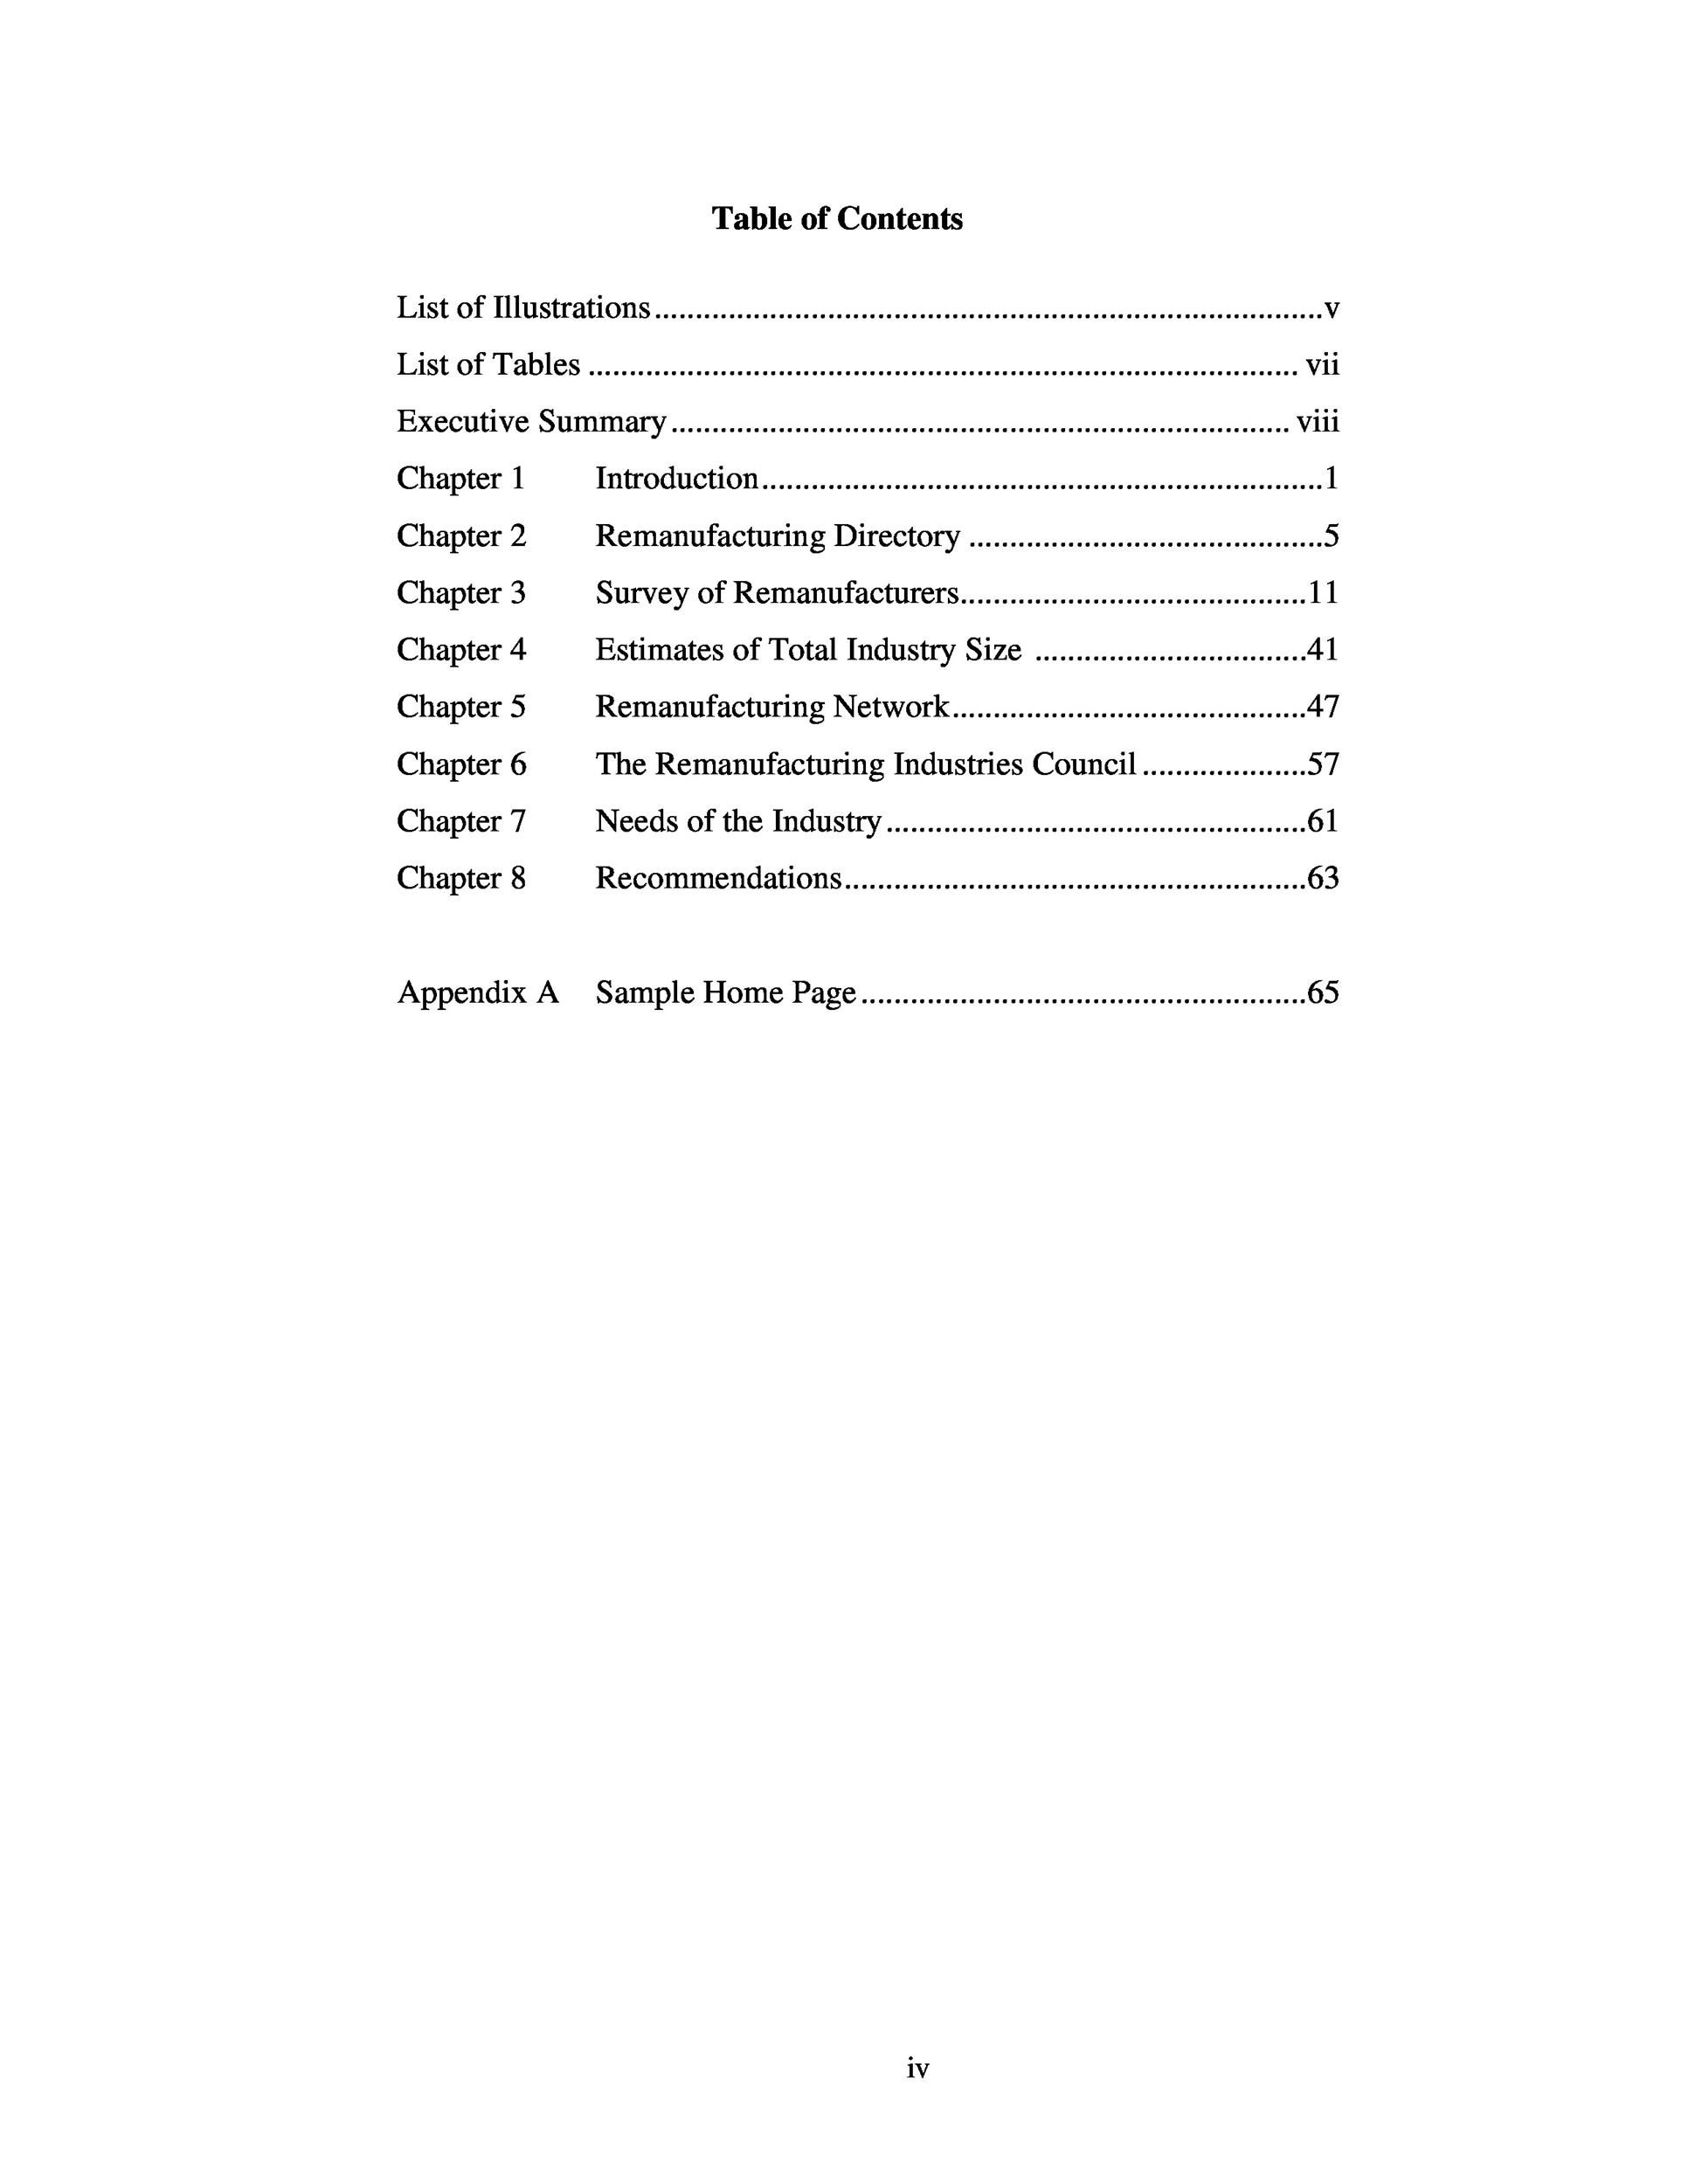 apa format table of contents appendices